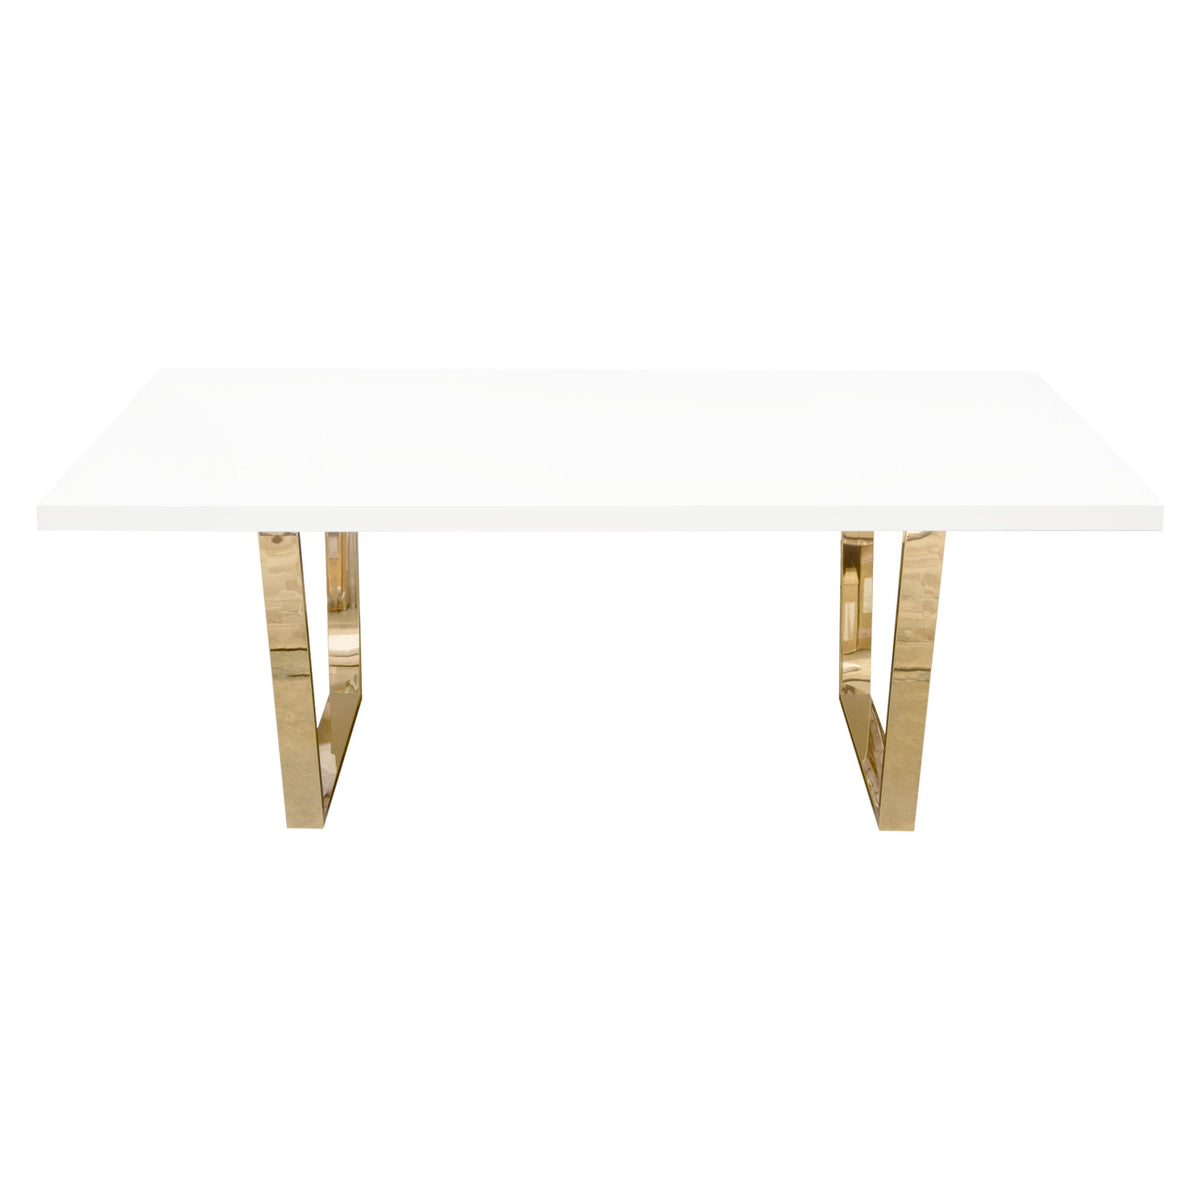 Alsie White Lacquer with Polished Gold Rectangular Dining Table - Luxury Living Collection